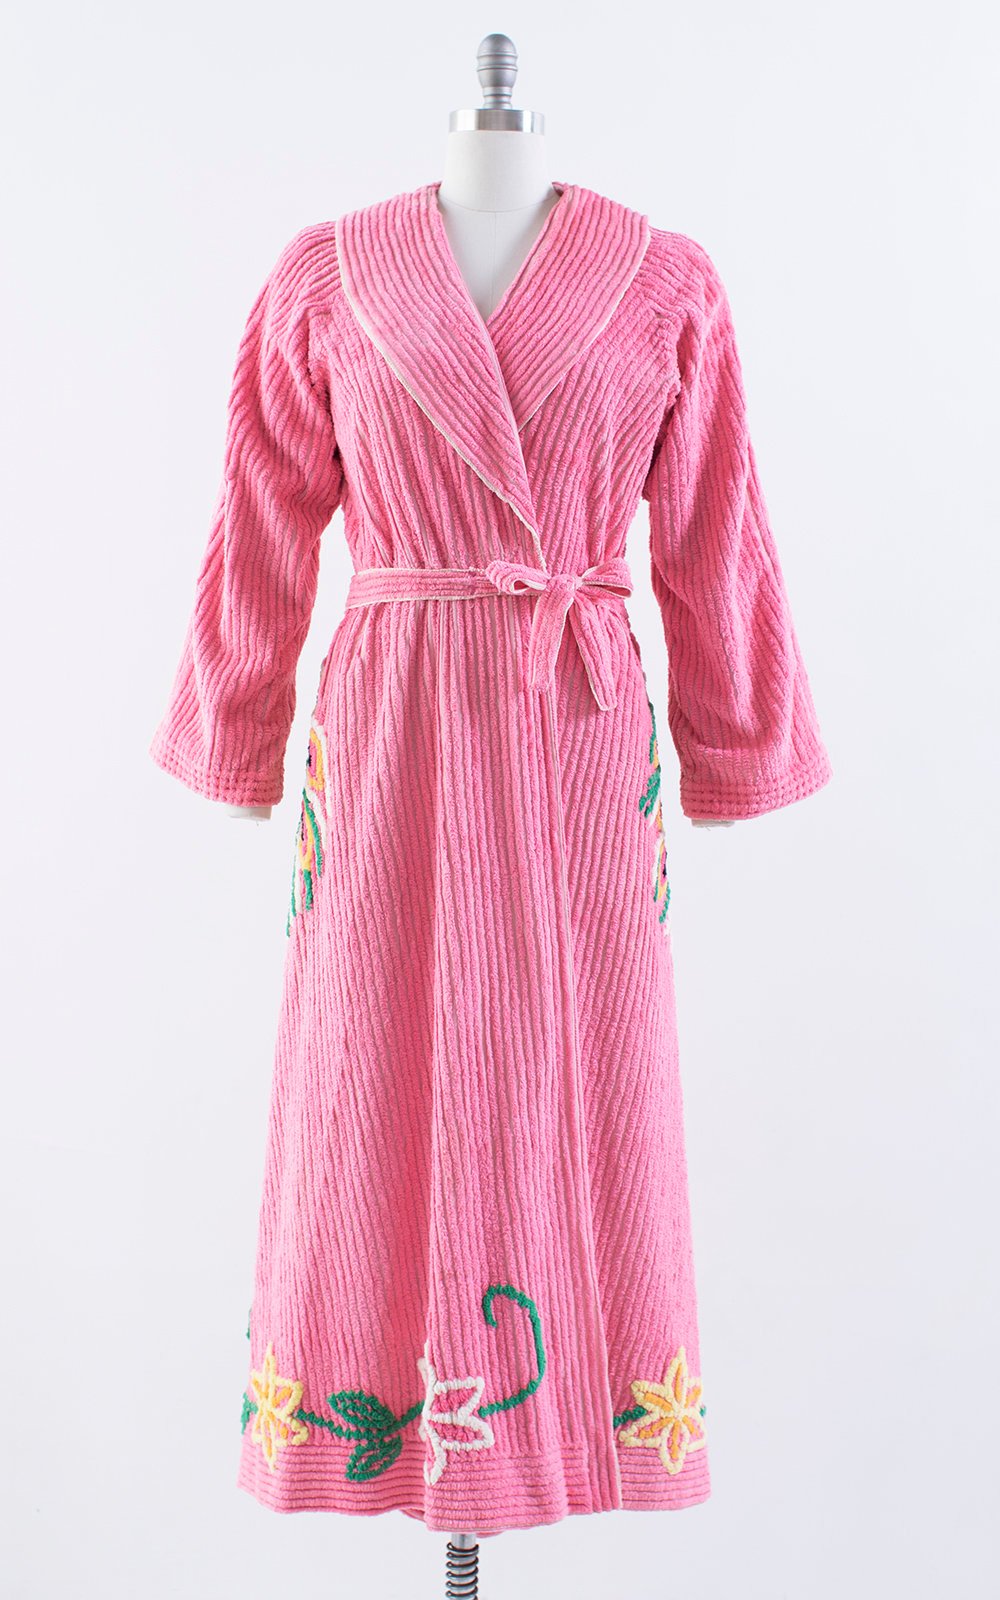 Vintage 1940s 1950s Robe | 40s 50s Chenille Peacock Novelty Print Pink Floral Loungewear Robe (small/medium)